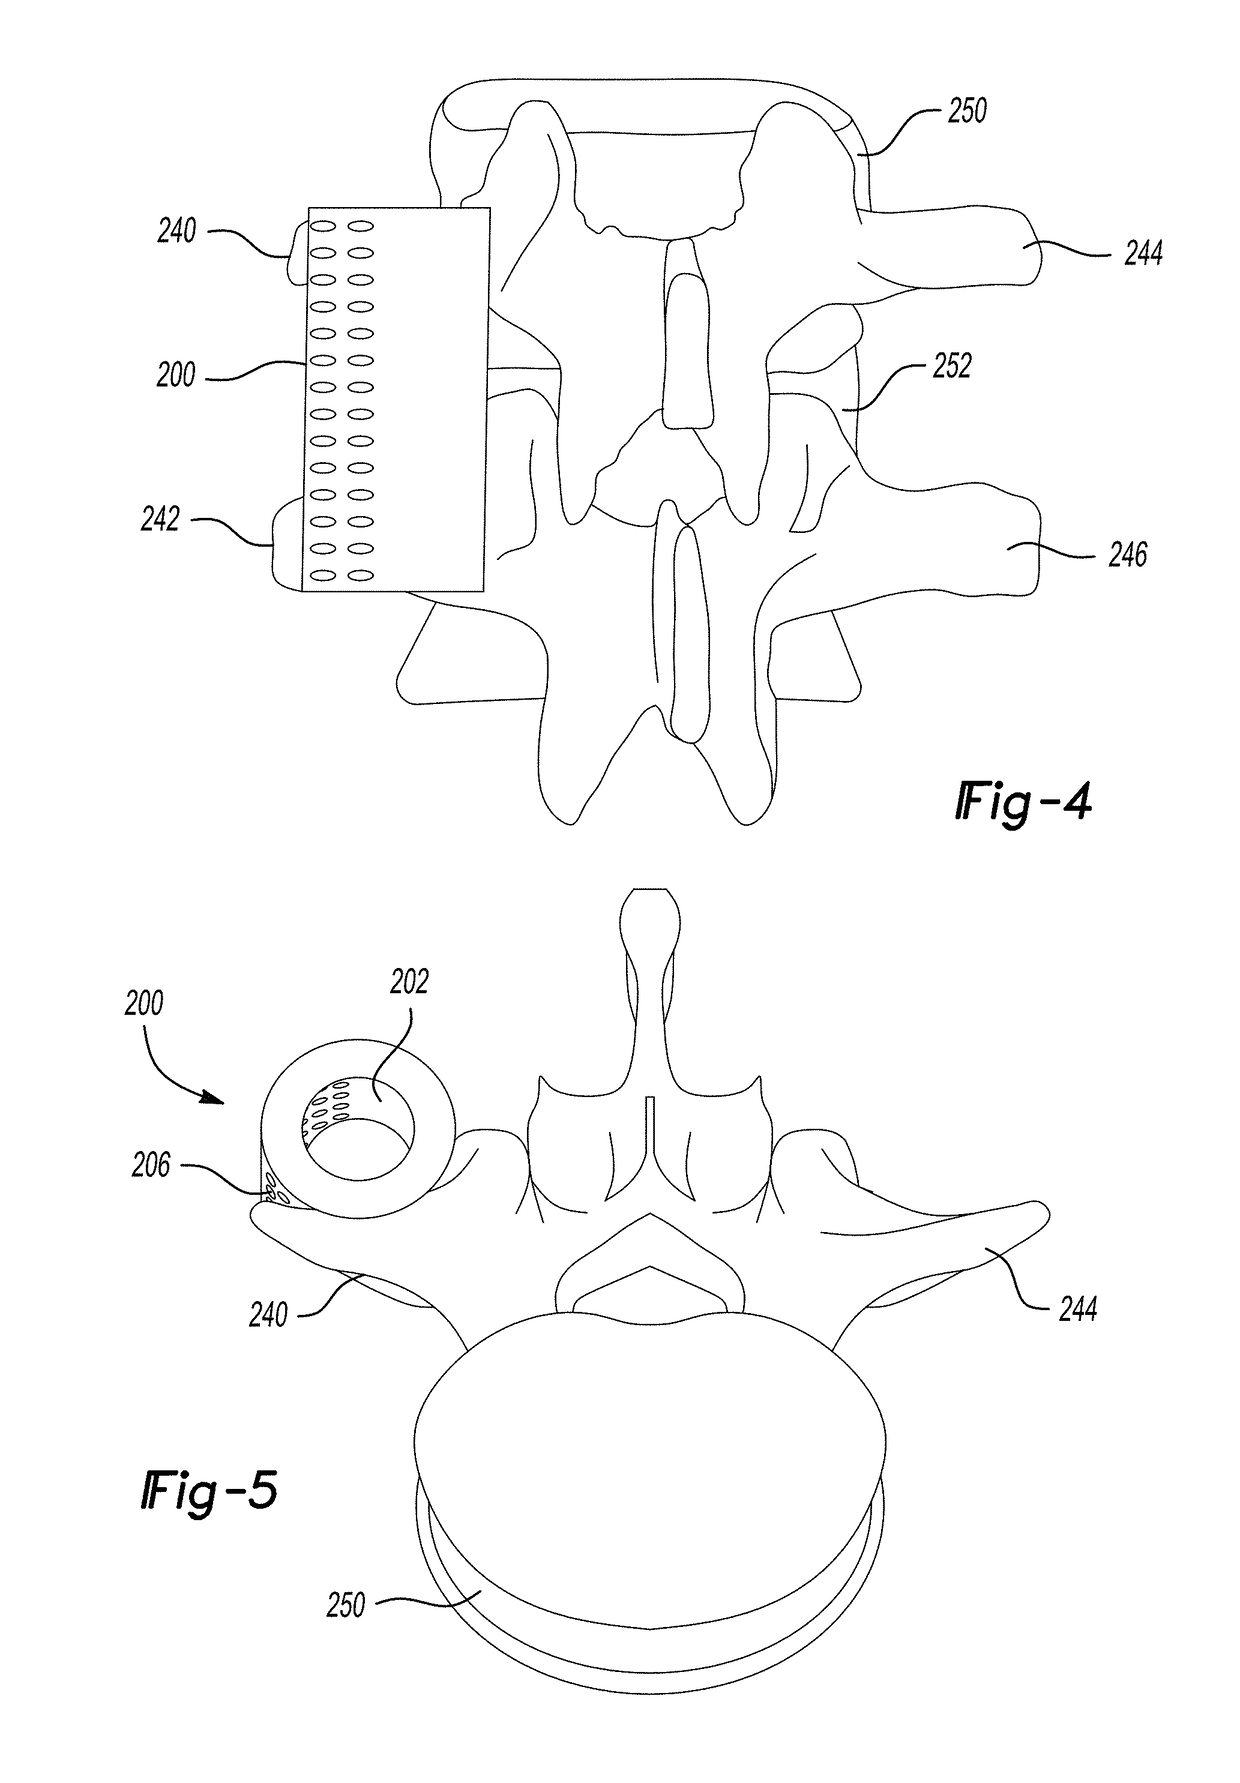 Biodegradable implant for intertransverse process fusion